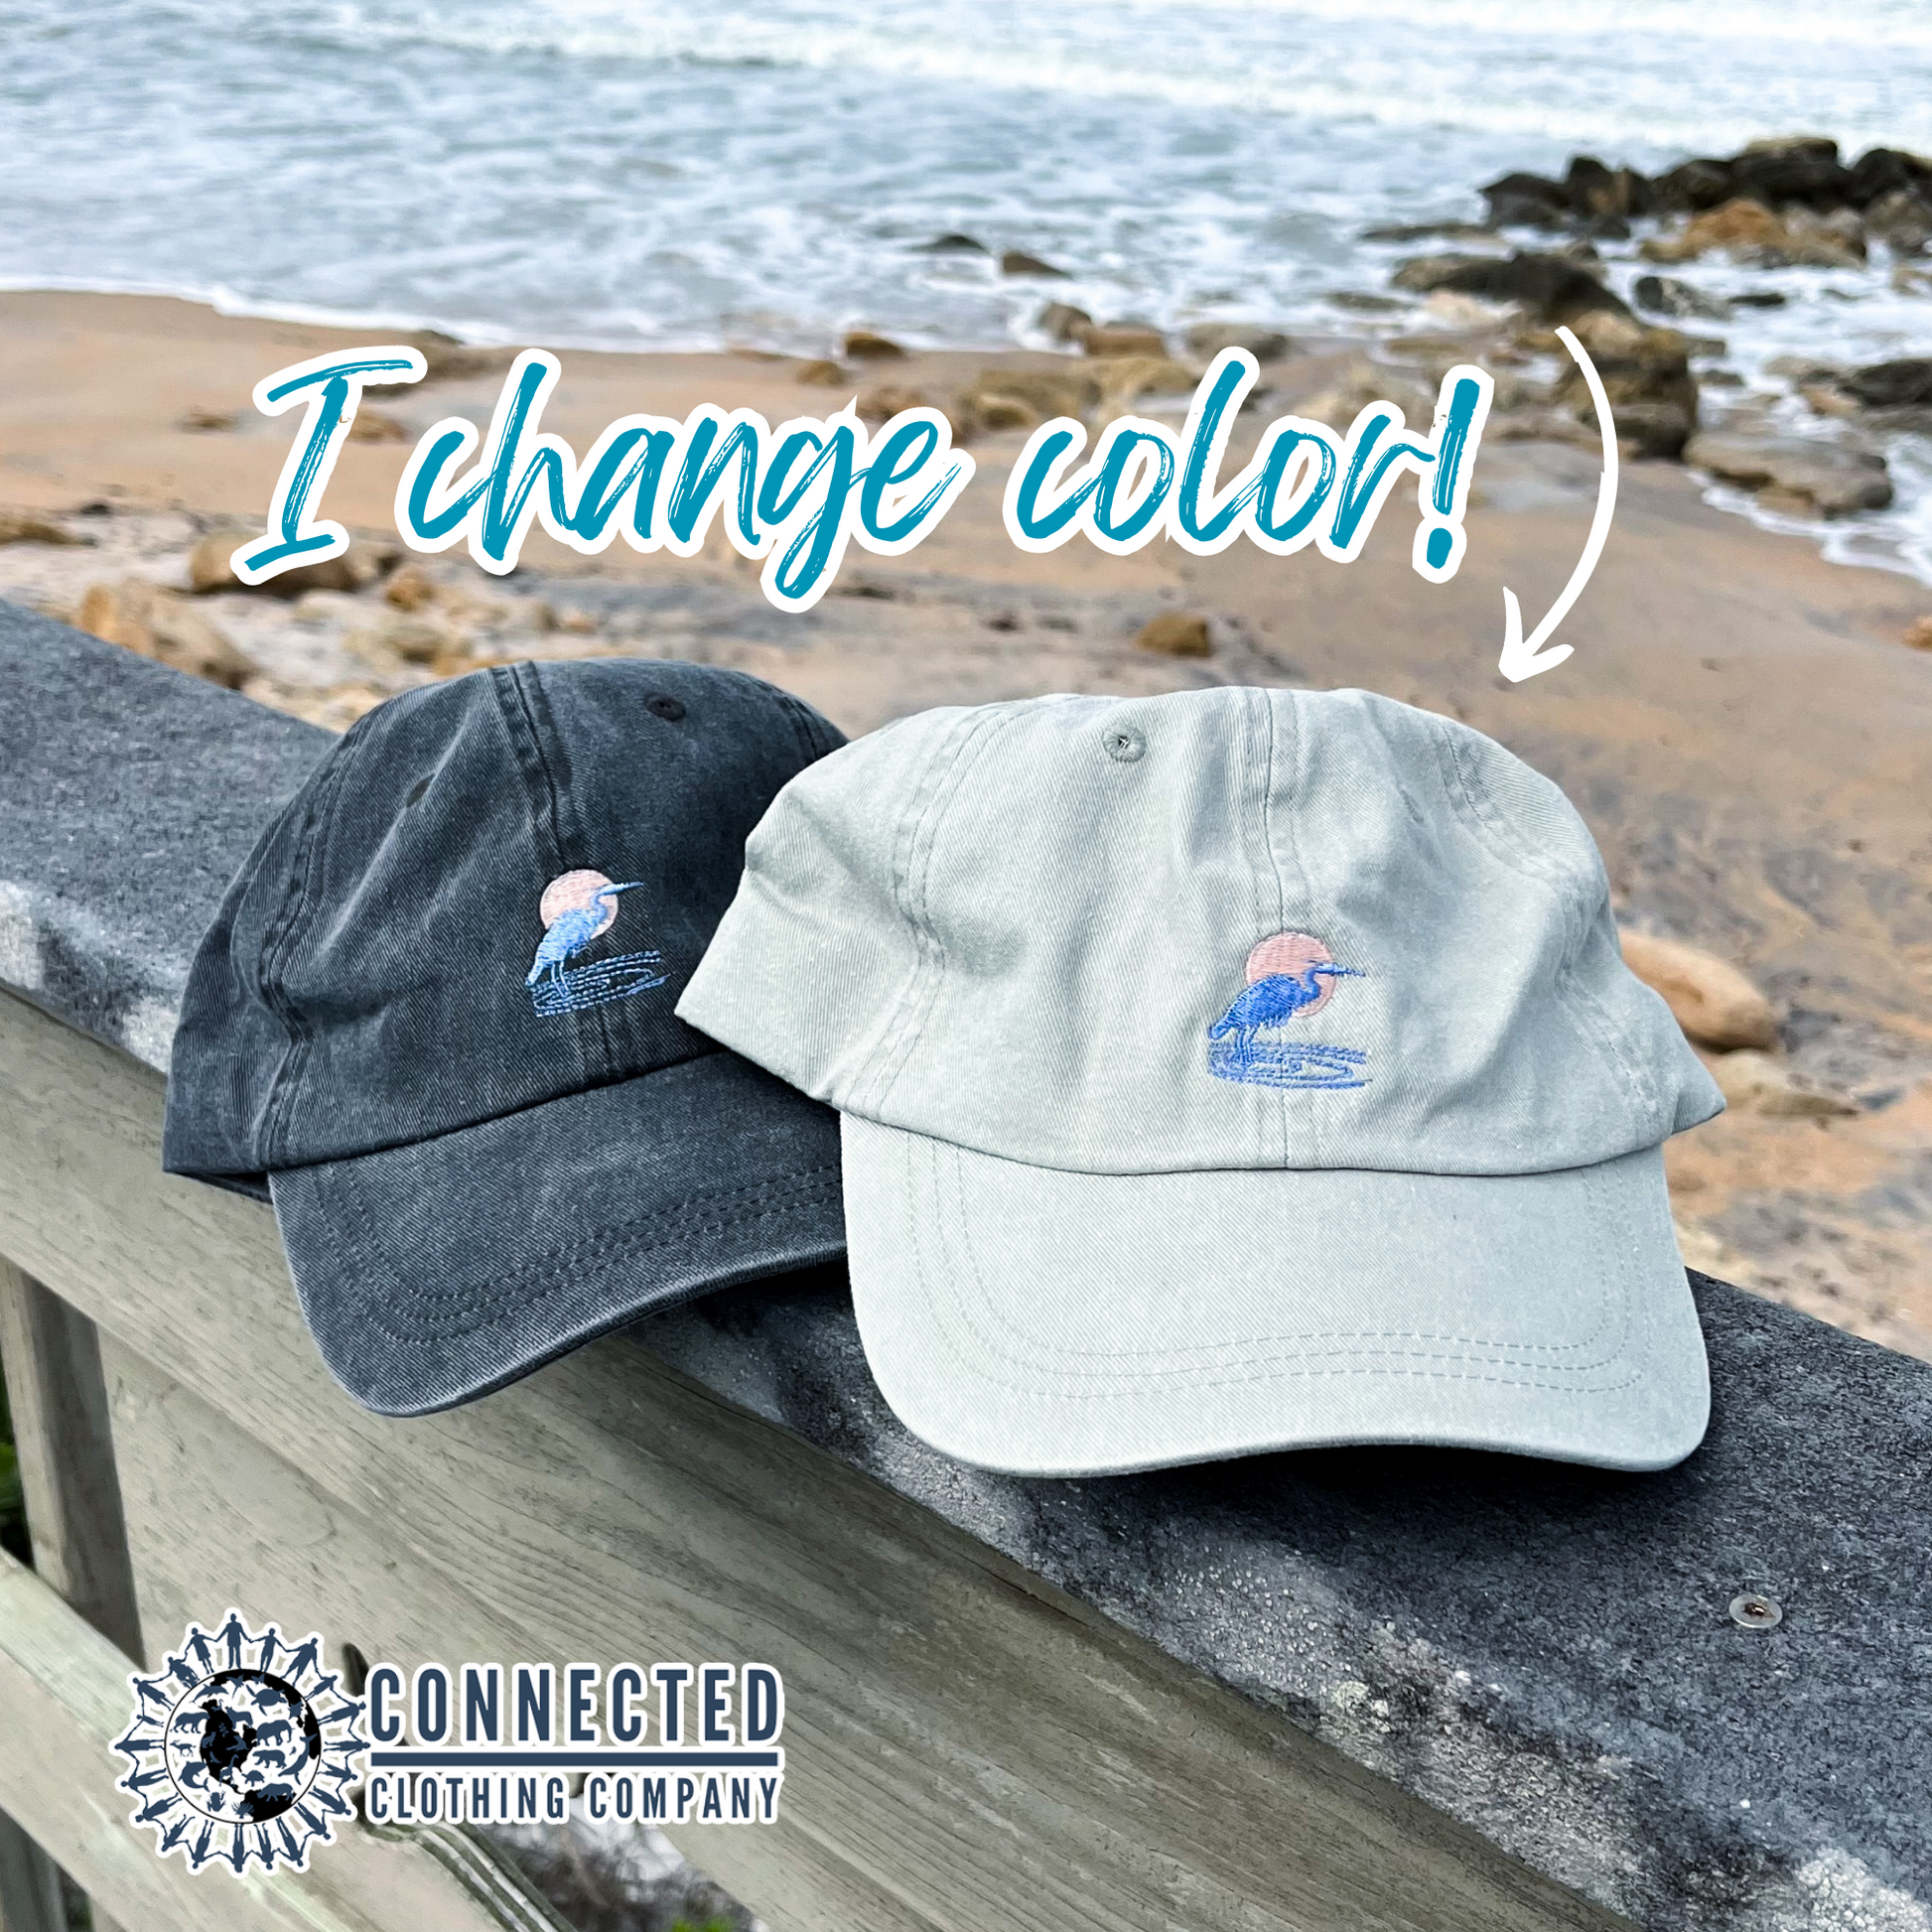 Blue Heron UV Embroidered Hat - Connected Clothing Company - 10% of proceeds donated to ocean conservation